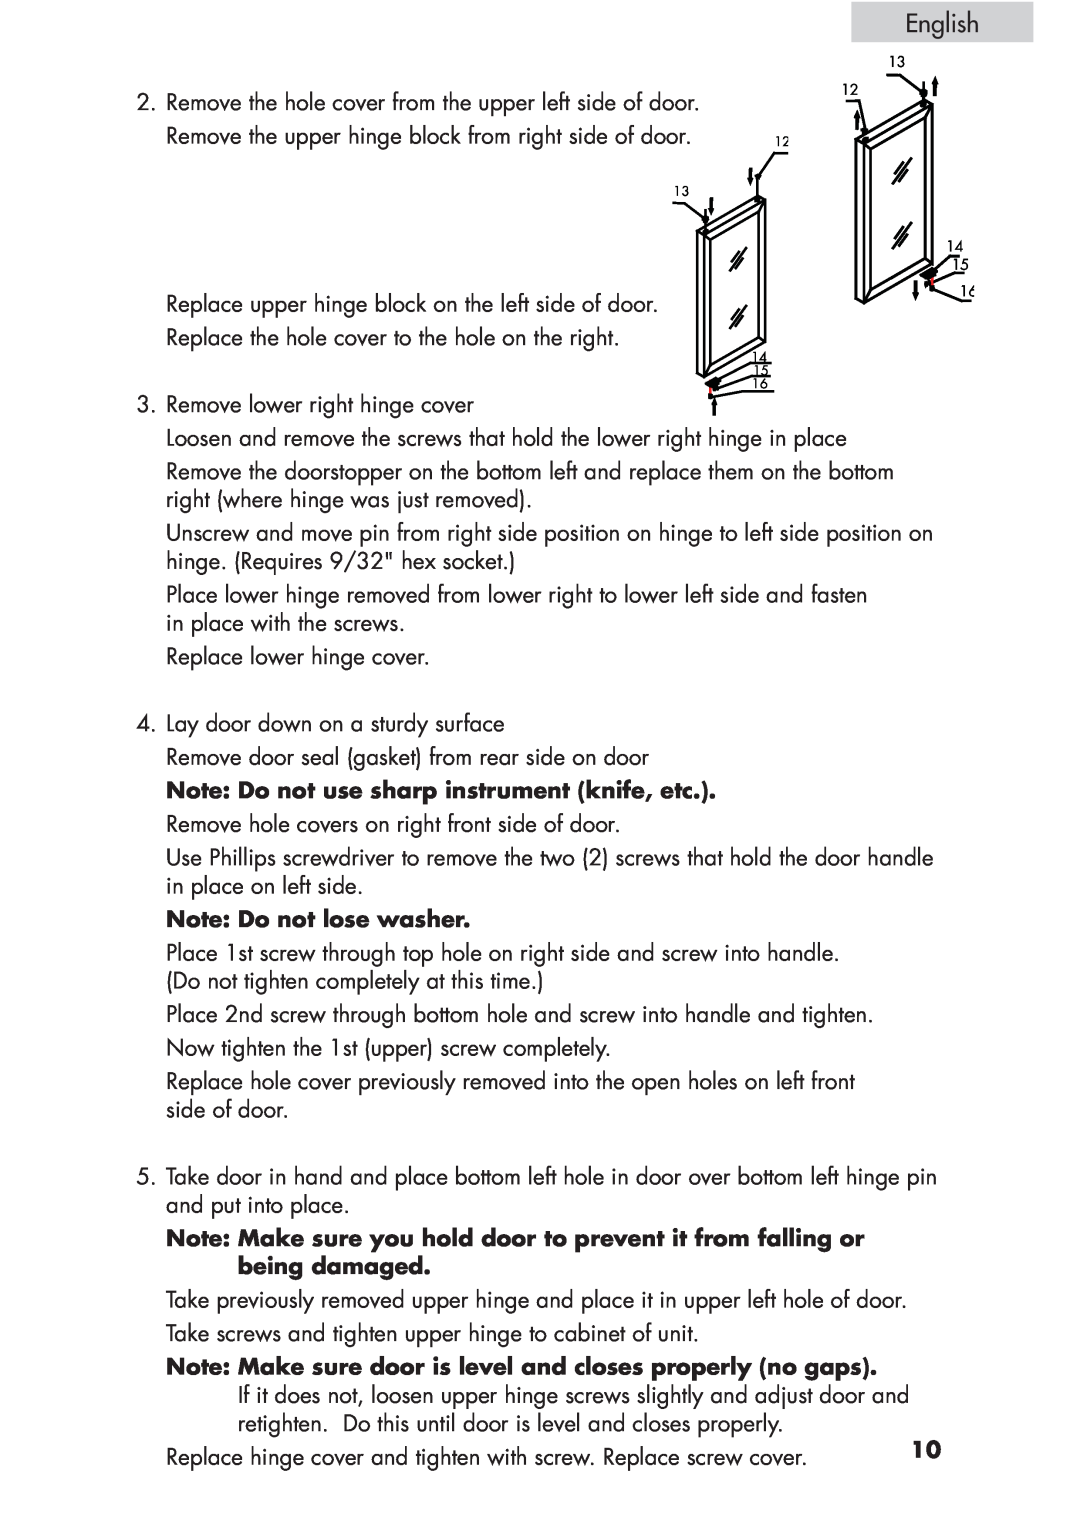 Haier HVCE15, HVCE24 user manual English, Note: Do not lose washer 